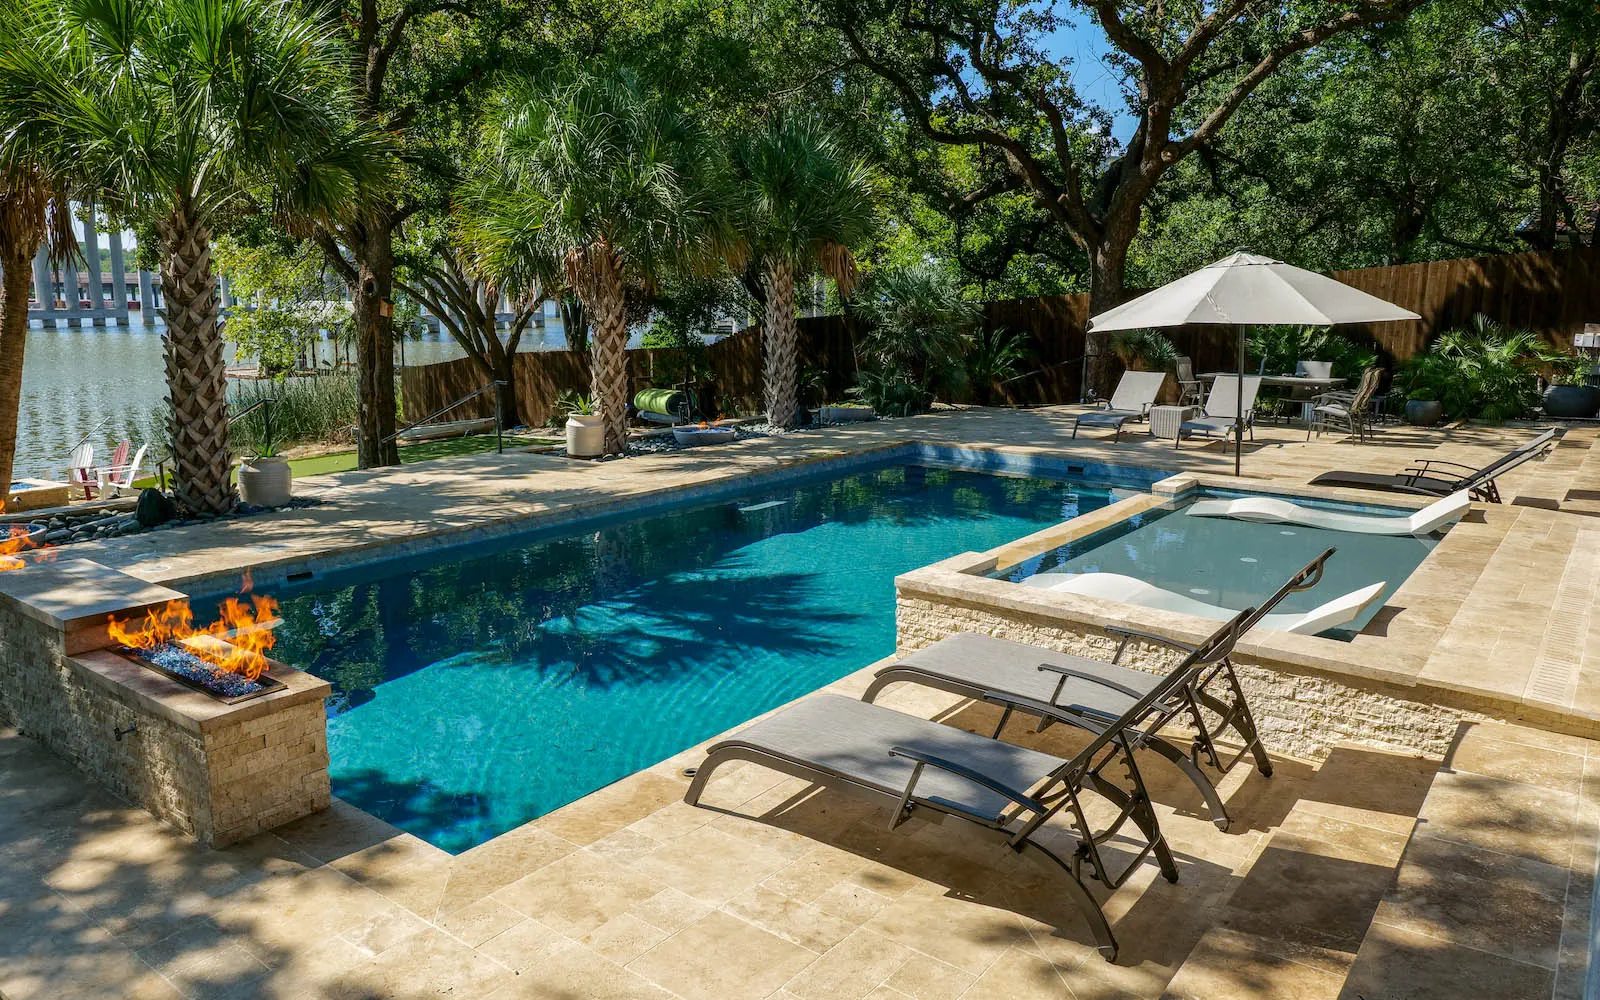 Pools123, your Leisure Pools fiberglass pool experts in Texas.